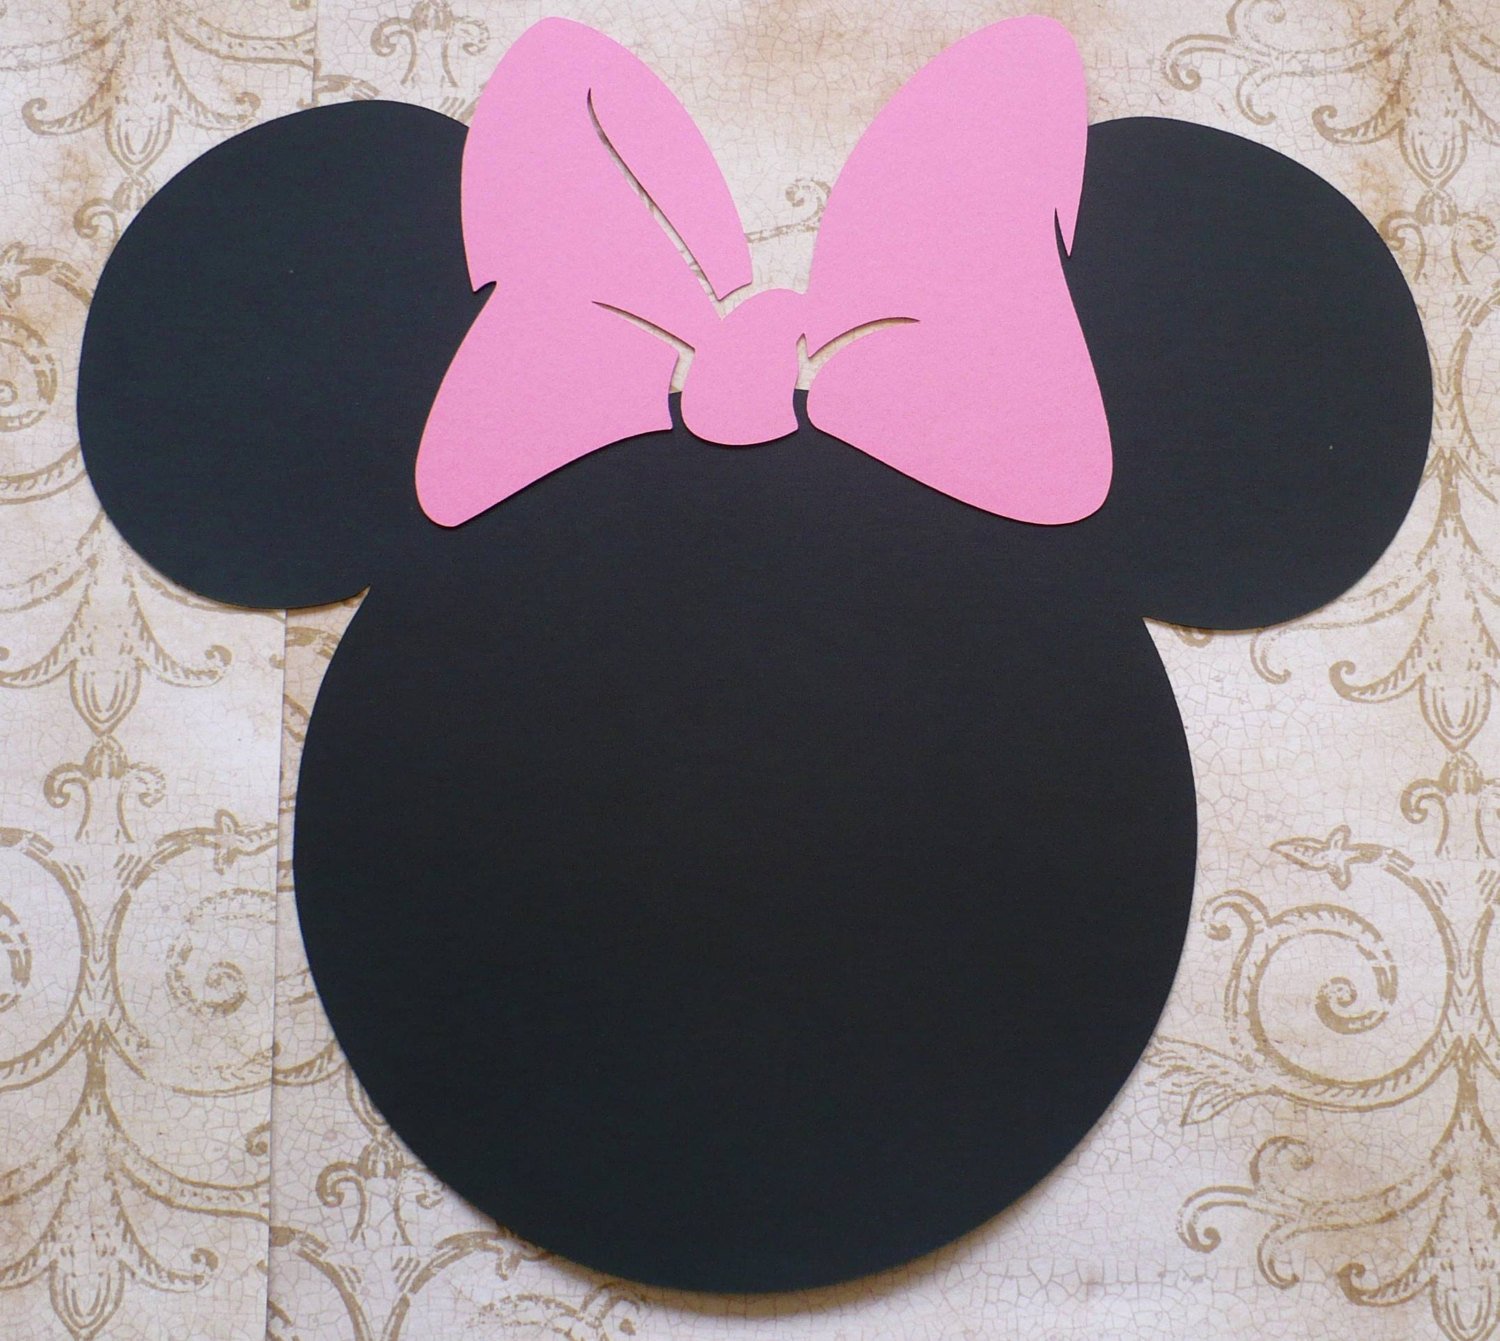 Minnie Mouse Cut Out Head Inspirational 2 Xl Minnie Mouse Head Shapes Medium Pink Bows Die Cut for